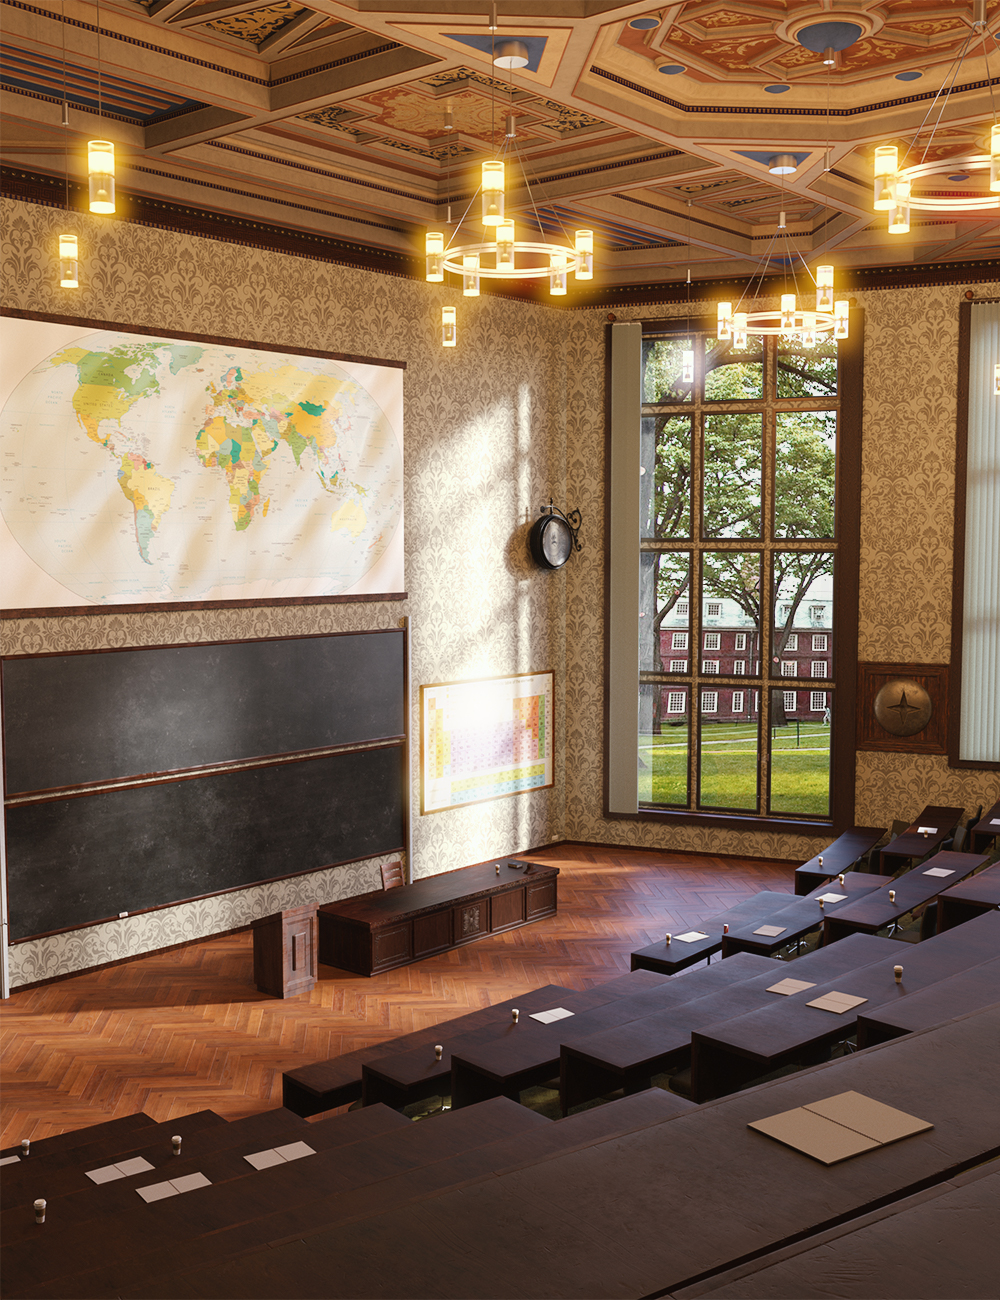 University Lecture Hall by: PrefoX, 3D Models by Daz 3D